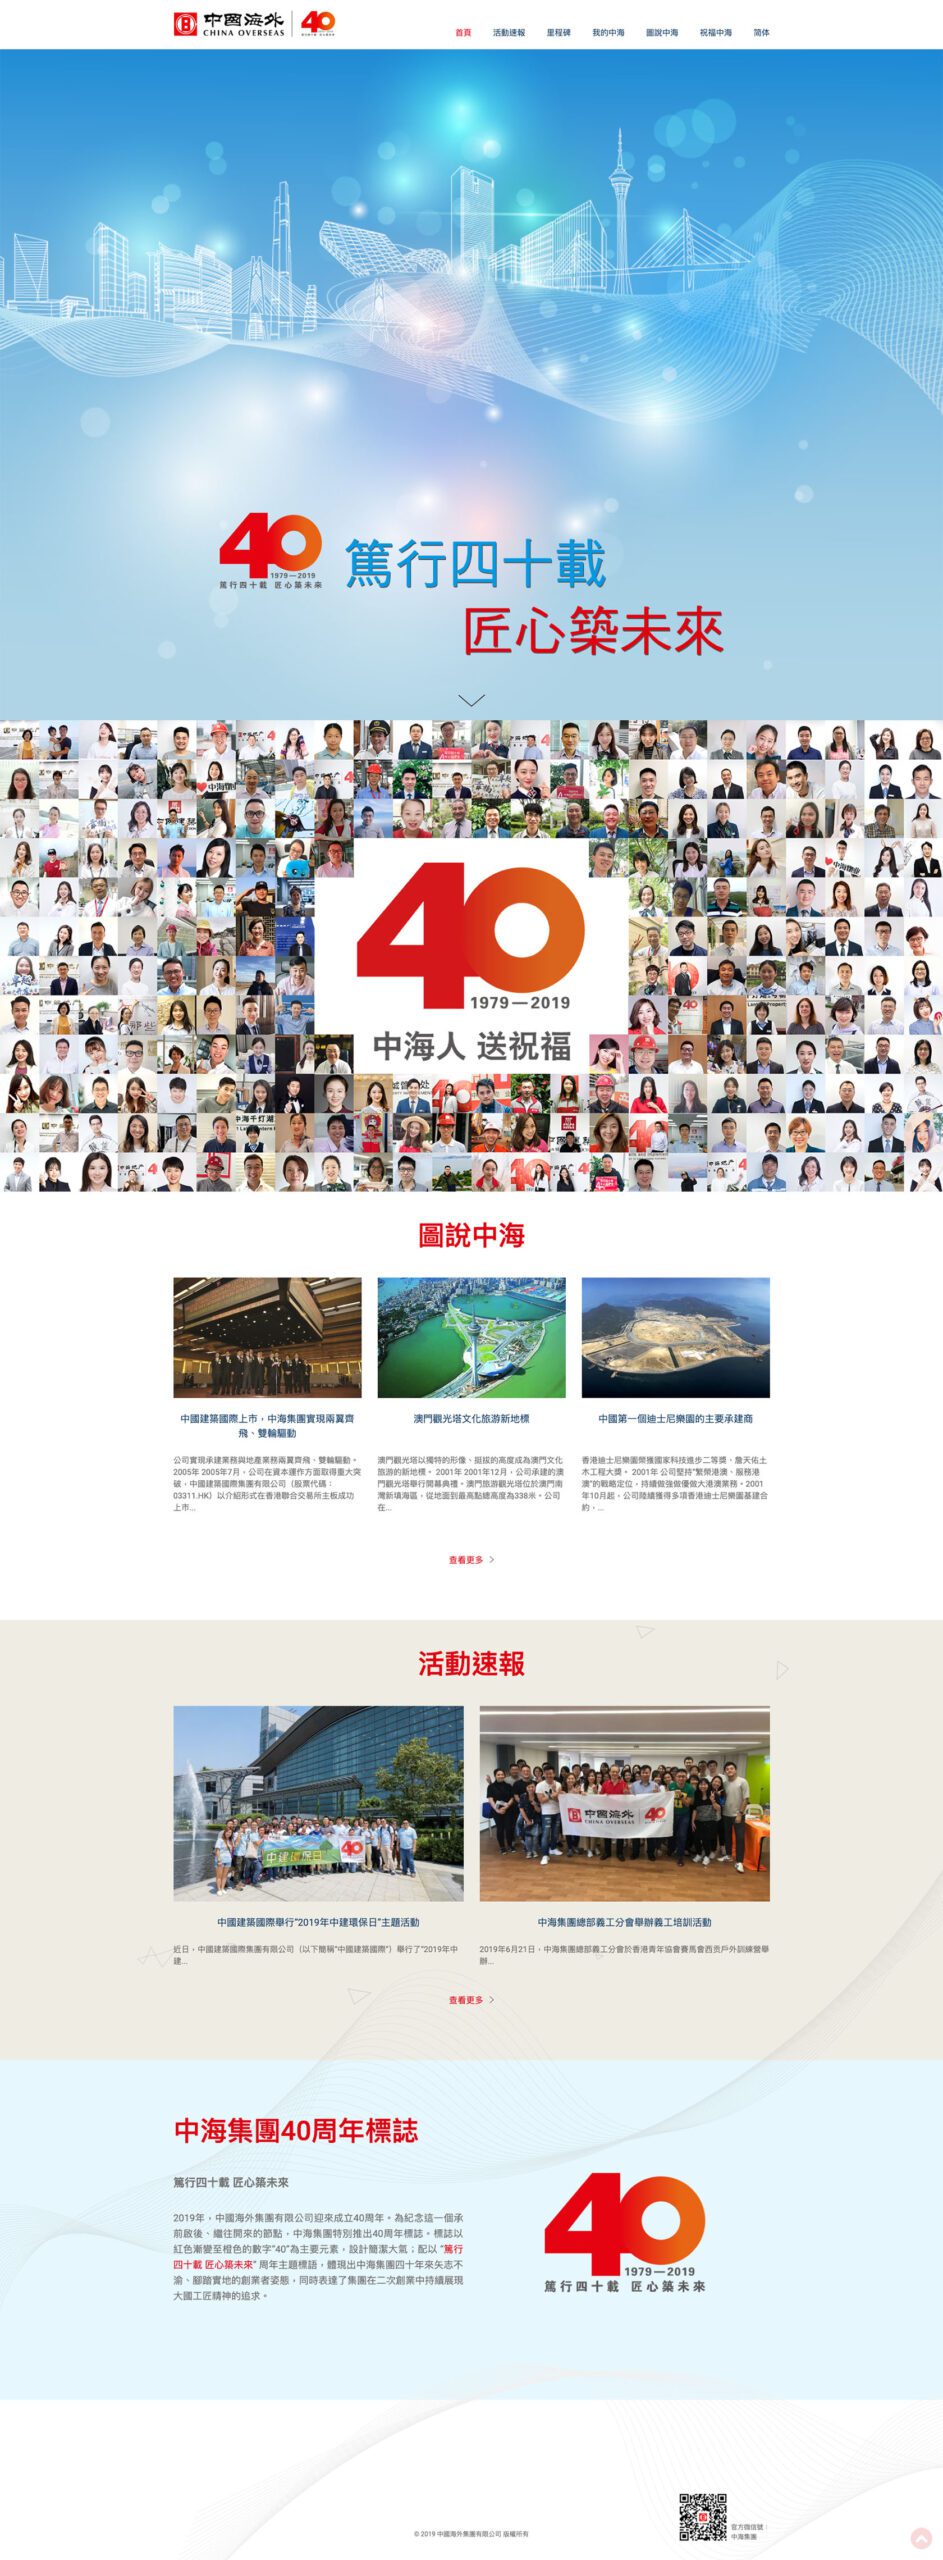 China Overseas Web Design Agency Miracle 00 scaled